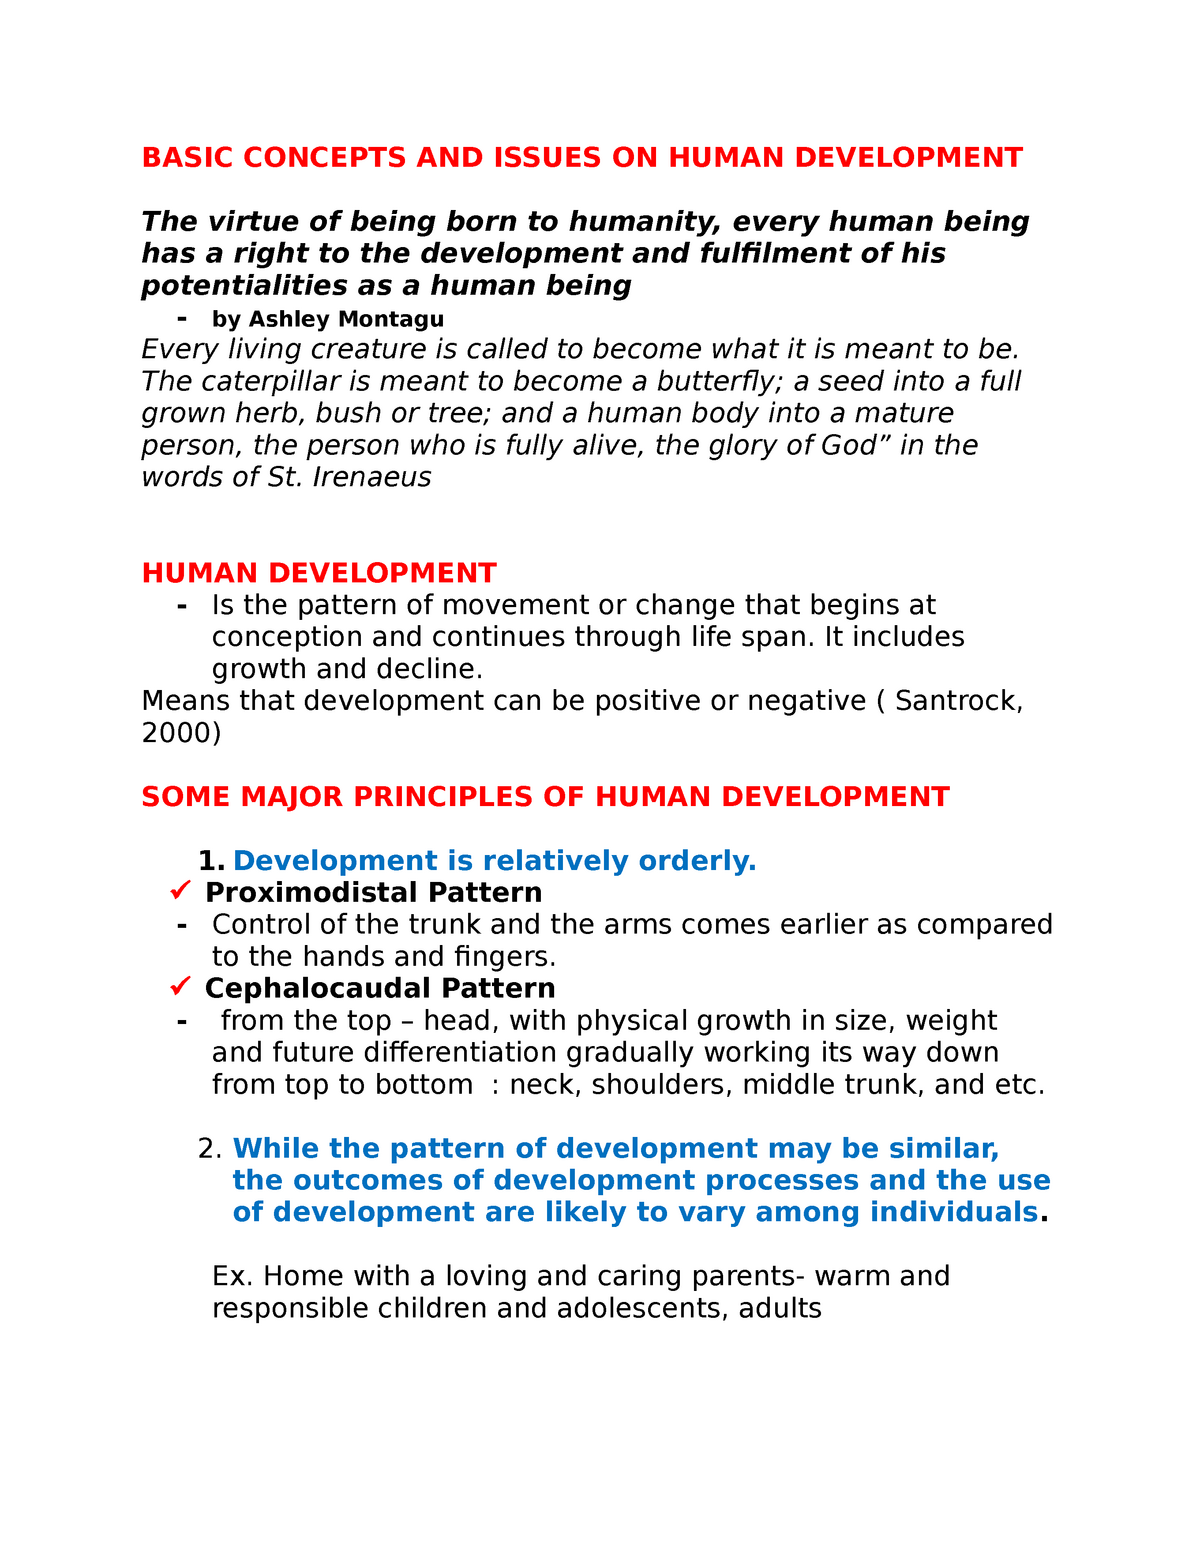 research articles on human development